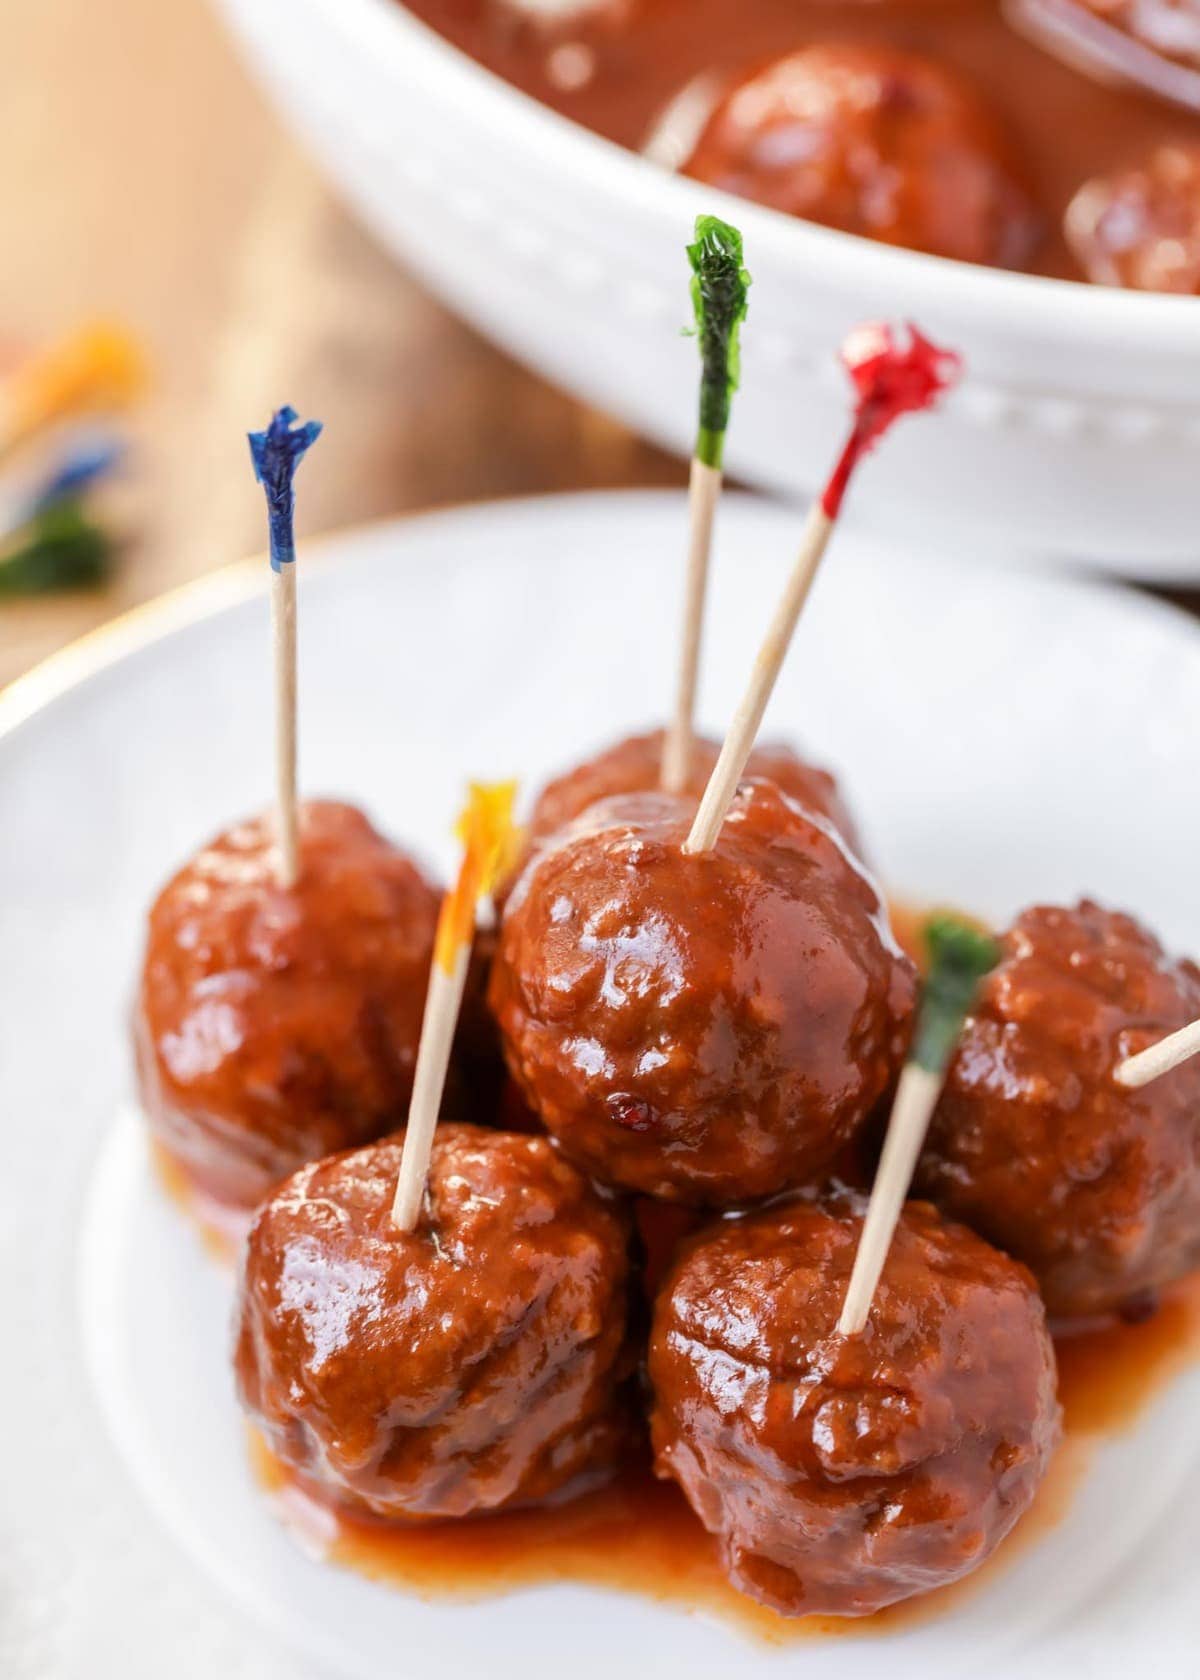 Best Crockpot Meatballs Just 5 Minutes To Prep Lil Luna,How To Remove Ink Stains